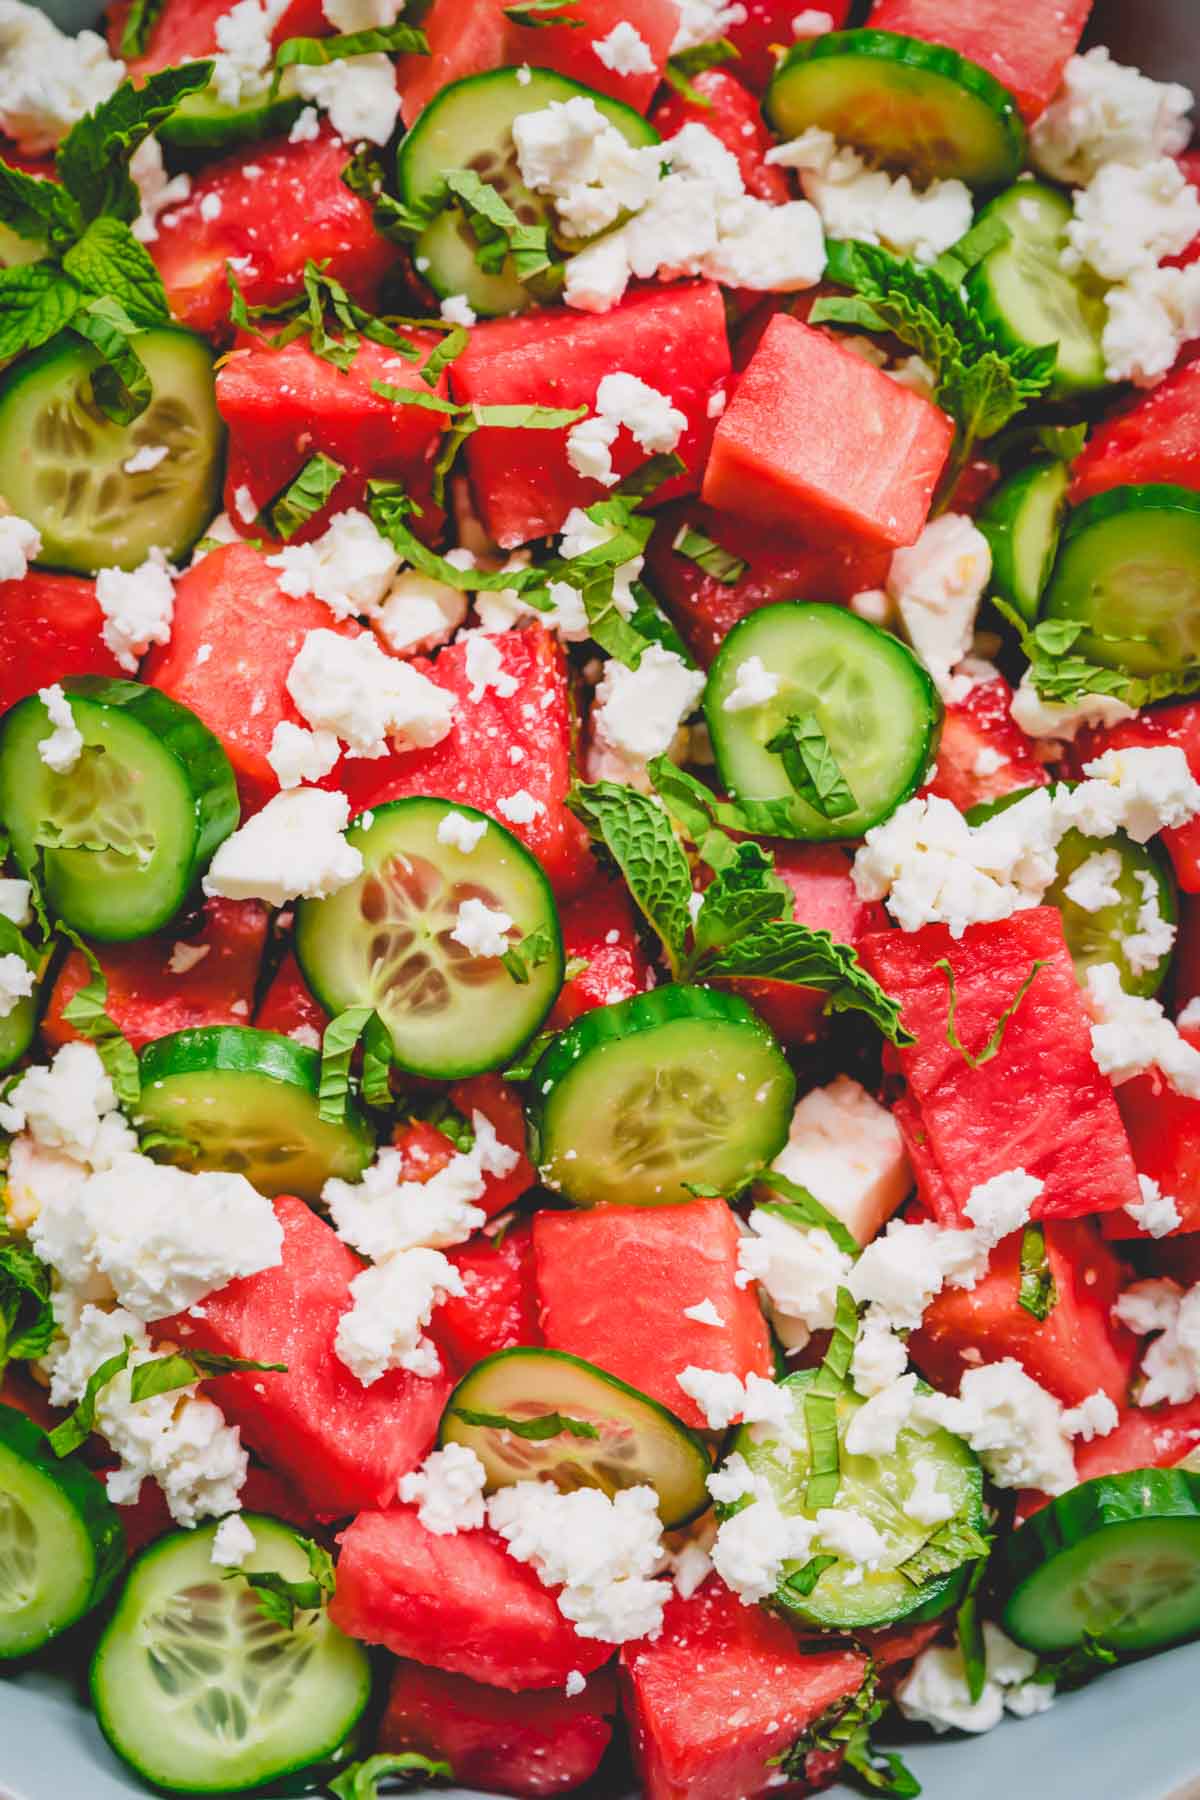 Upclose photo of watermelon feta cheese garnished with chopped fresh mint.